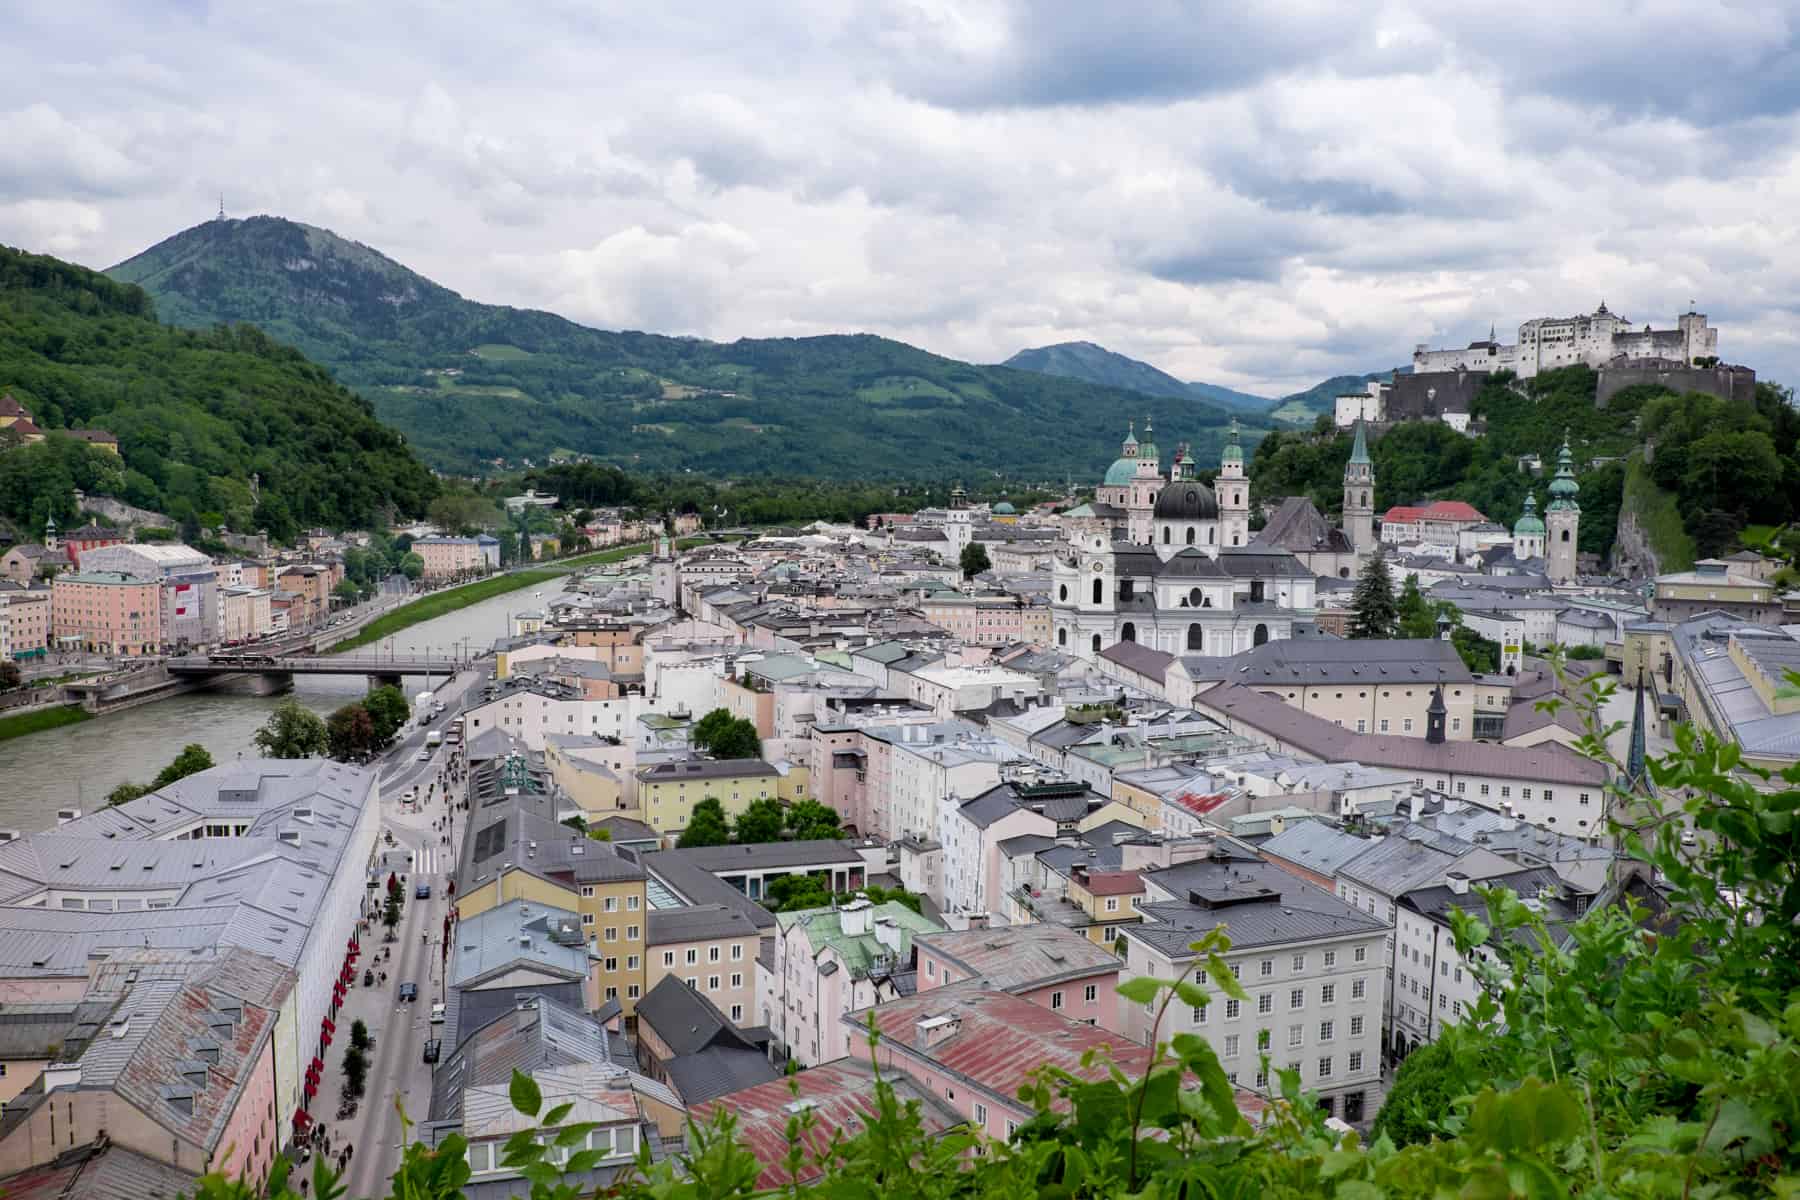 Arial view of the riverside Salzburg Historical Old Town with it pastel buildings, mint green rooftops and castle on the hill.